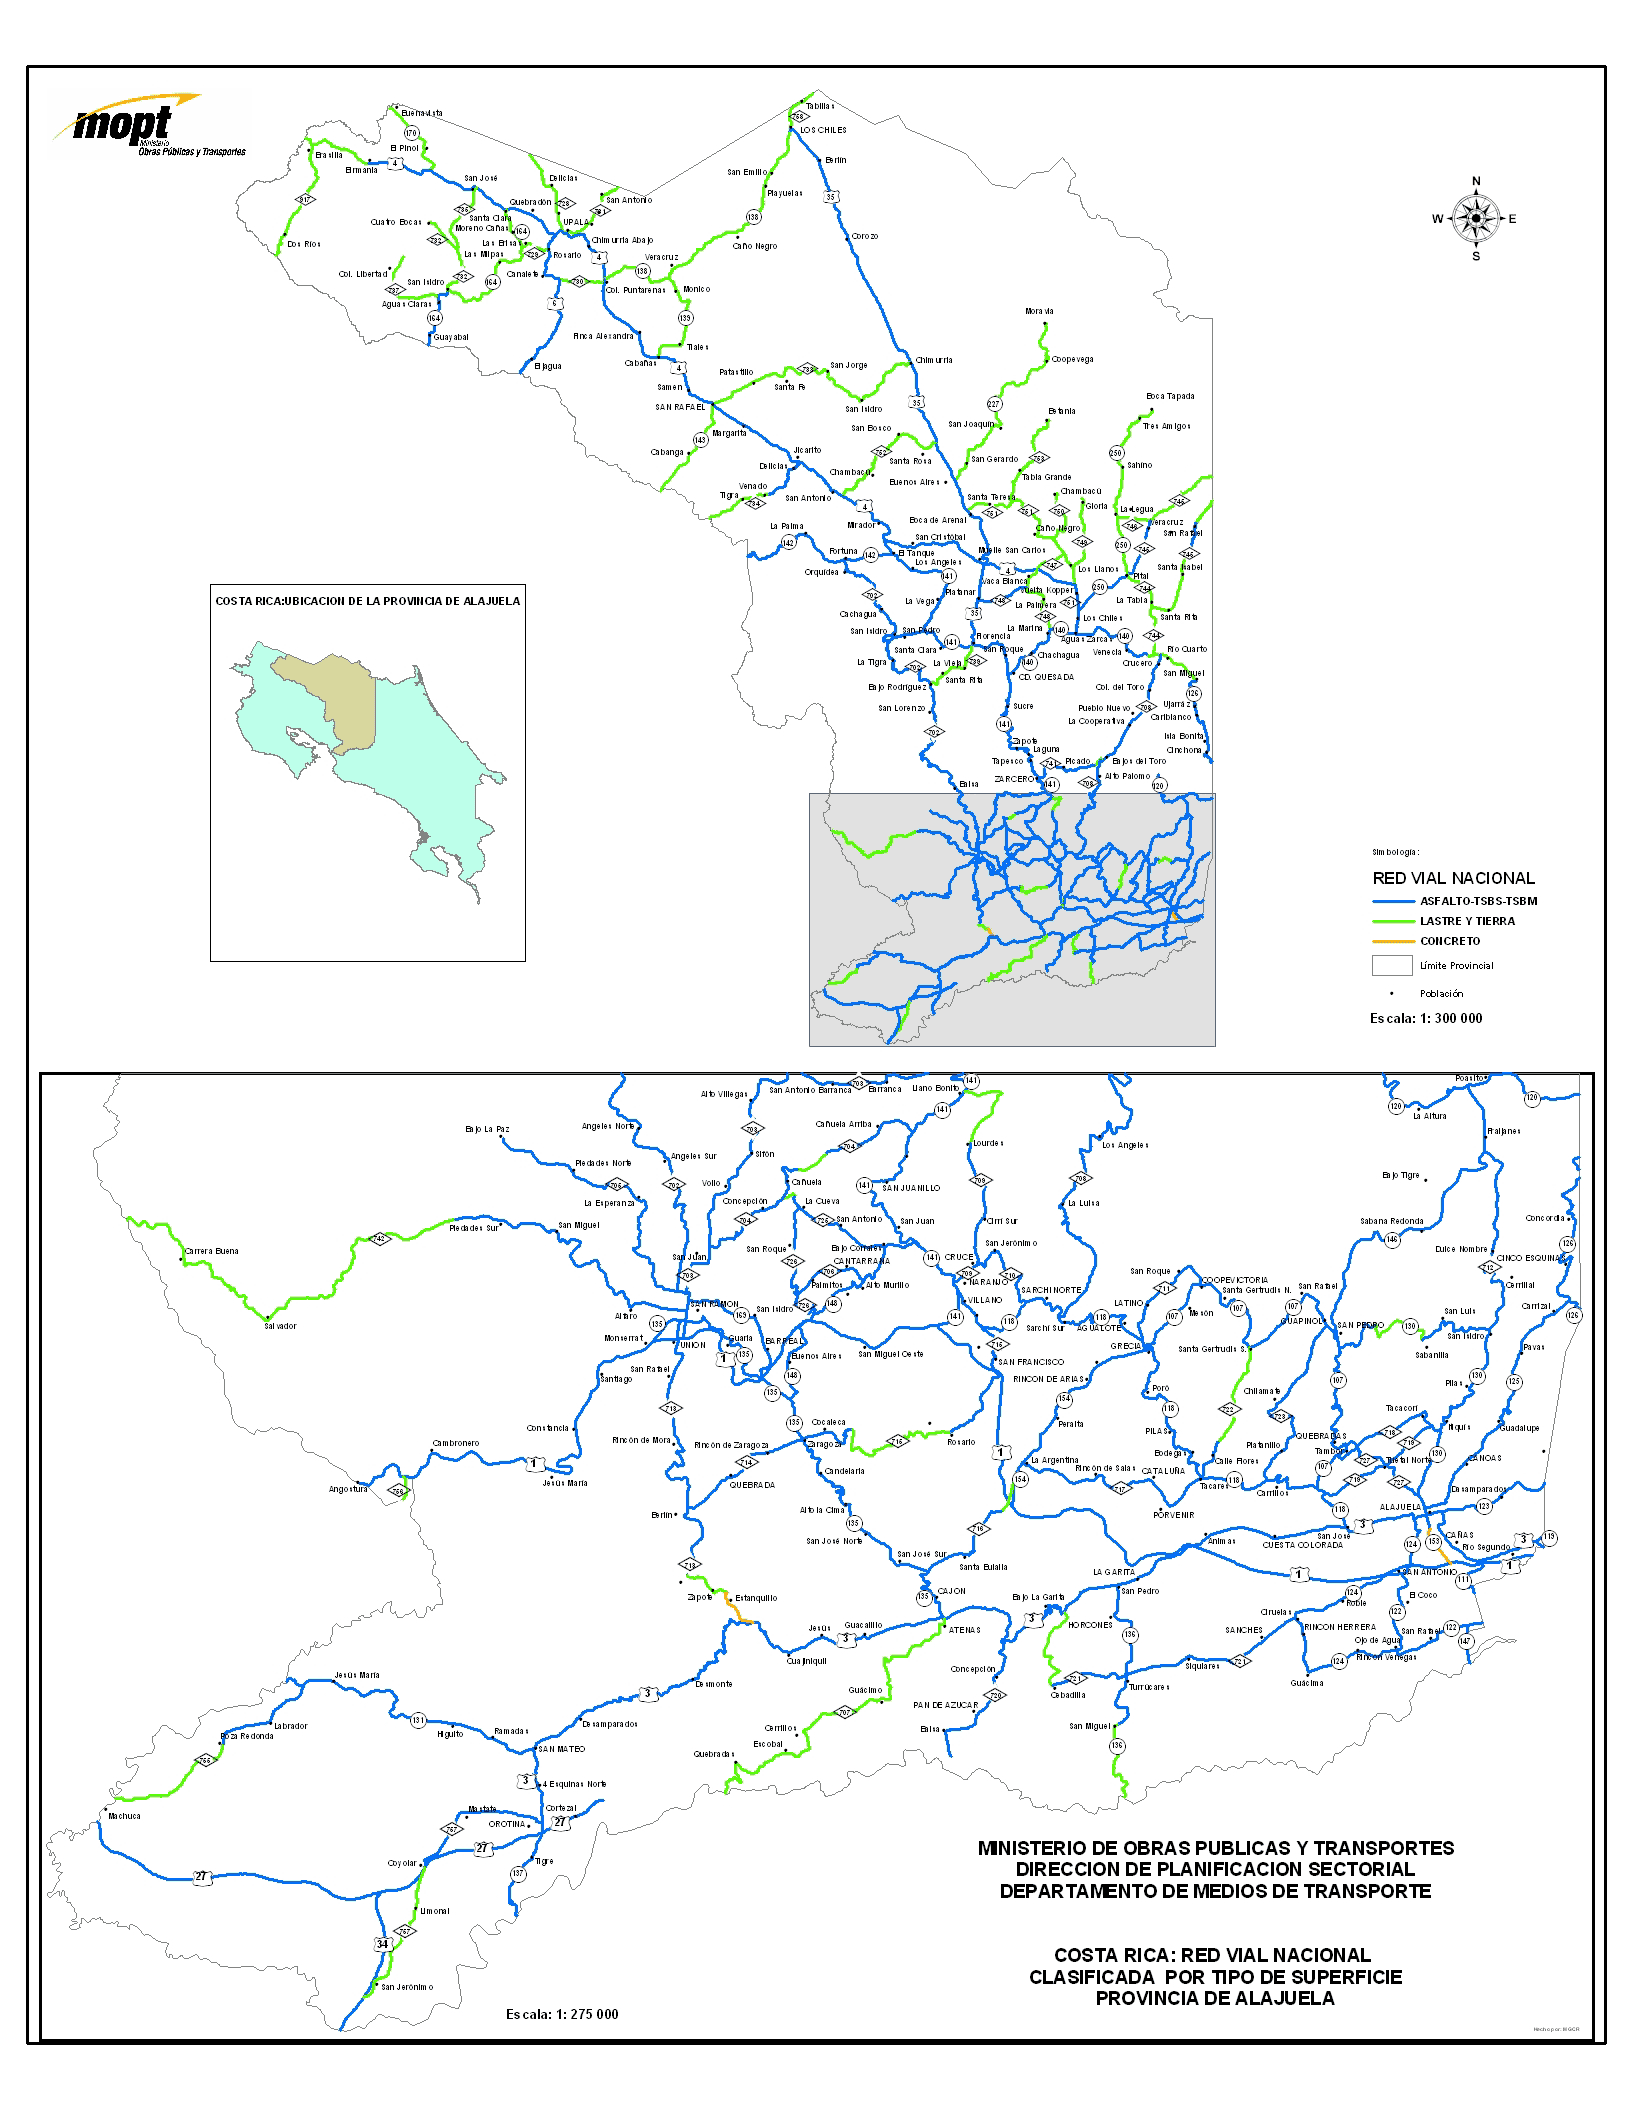 Alajuela Province Roads, Type of Surface Map, Costa Rica